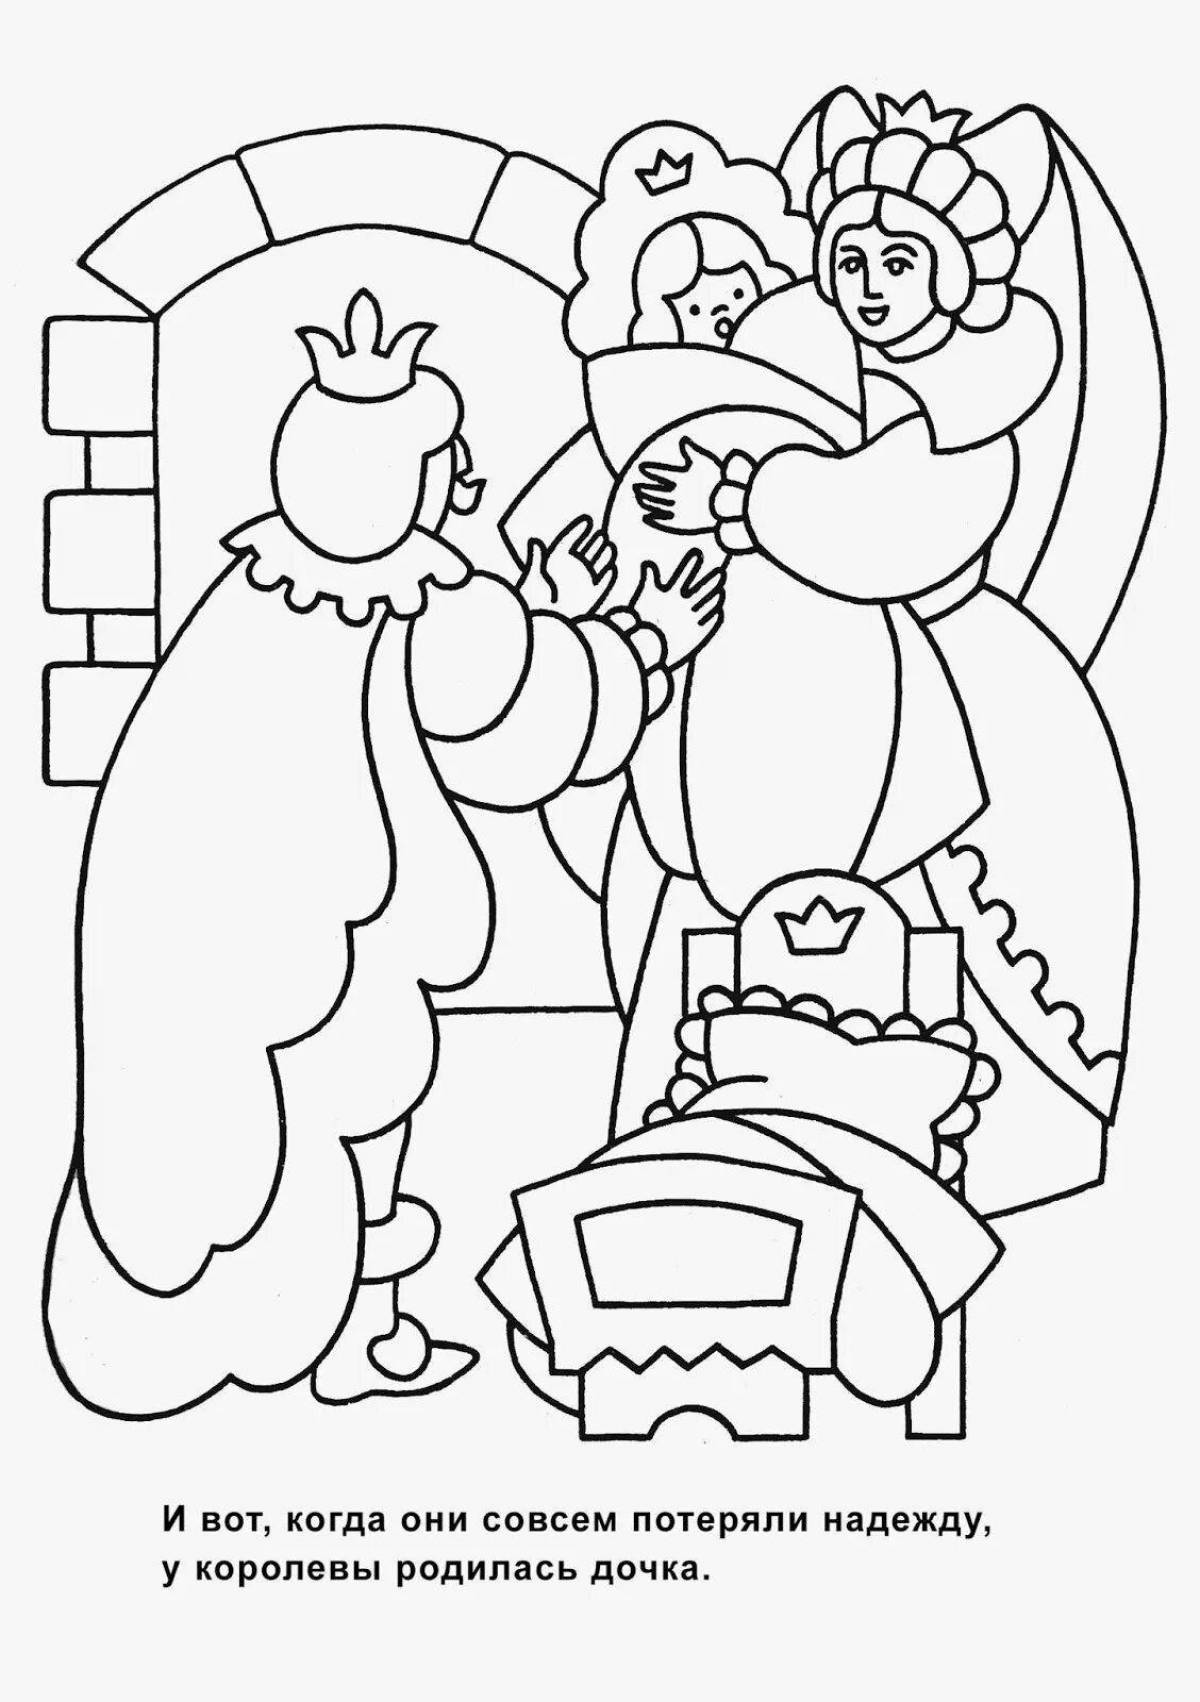 Charming sh perro coloring page